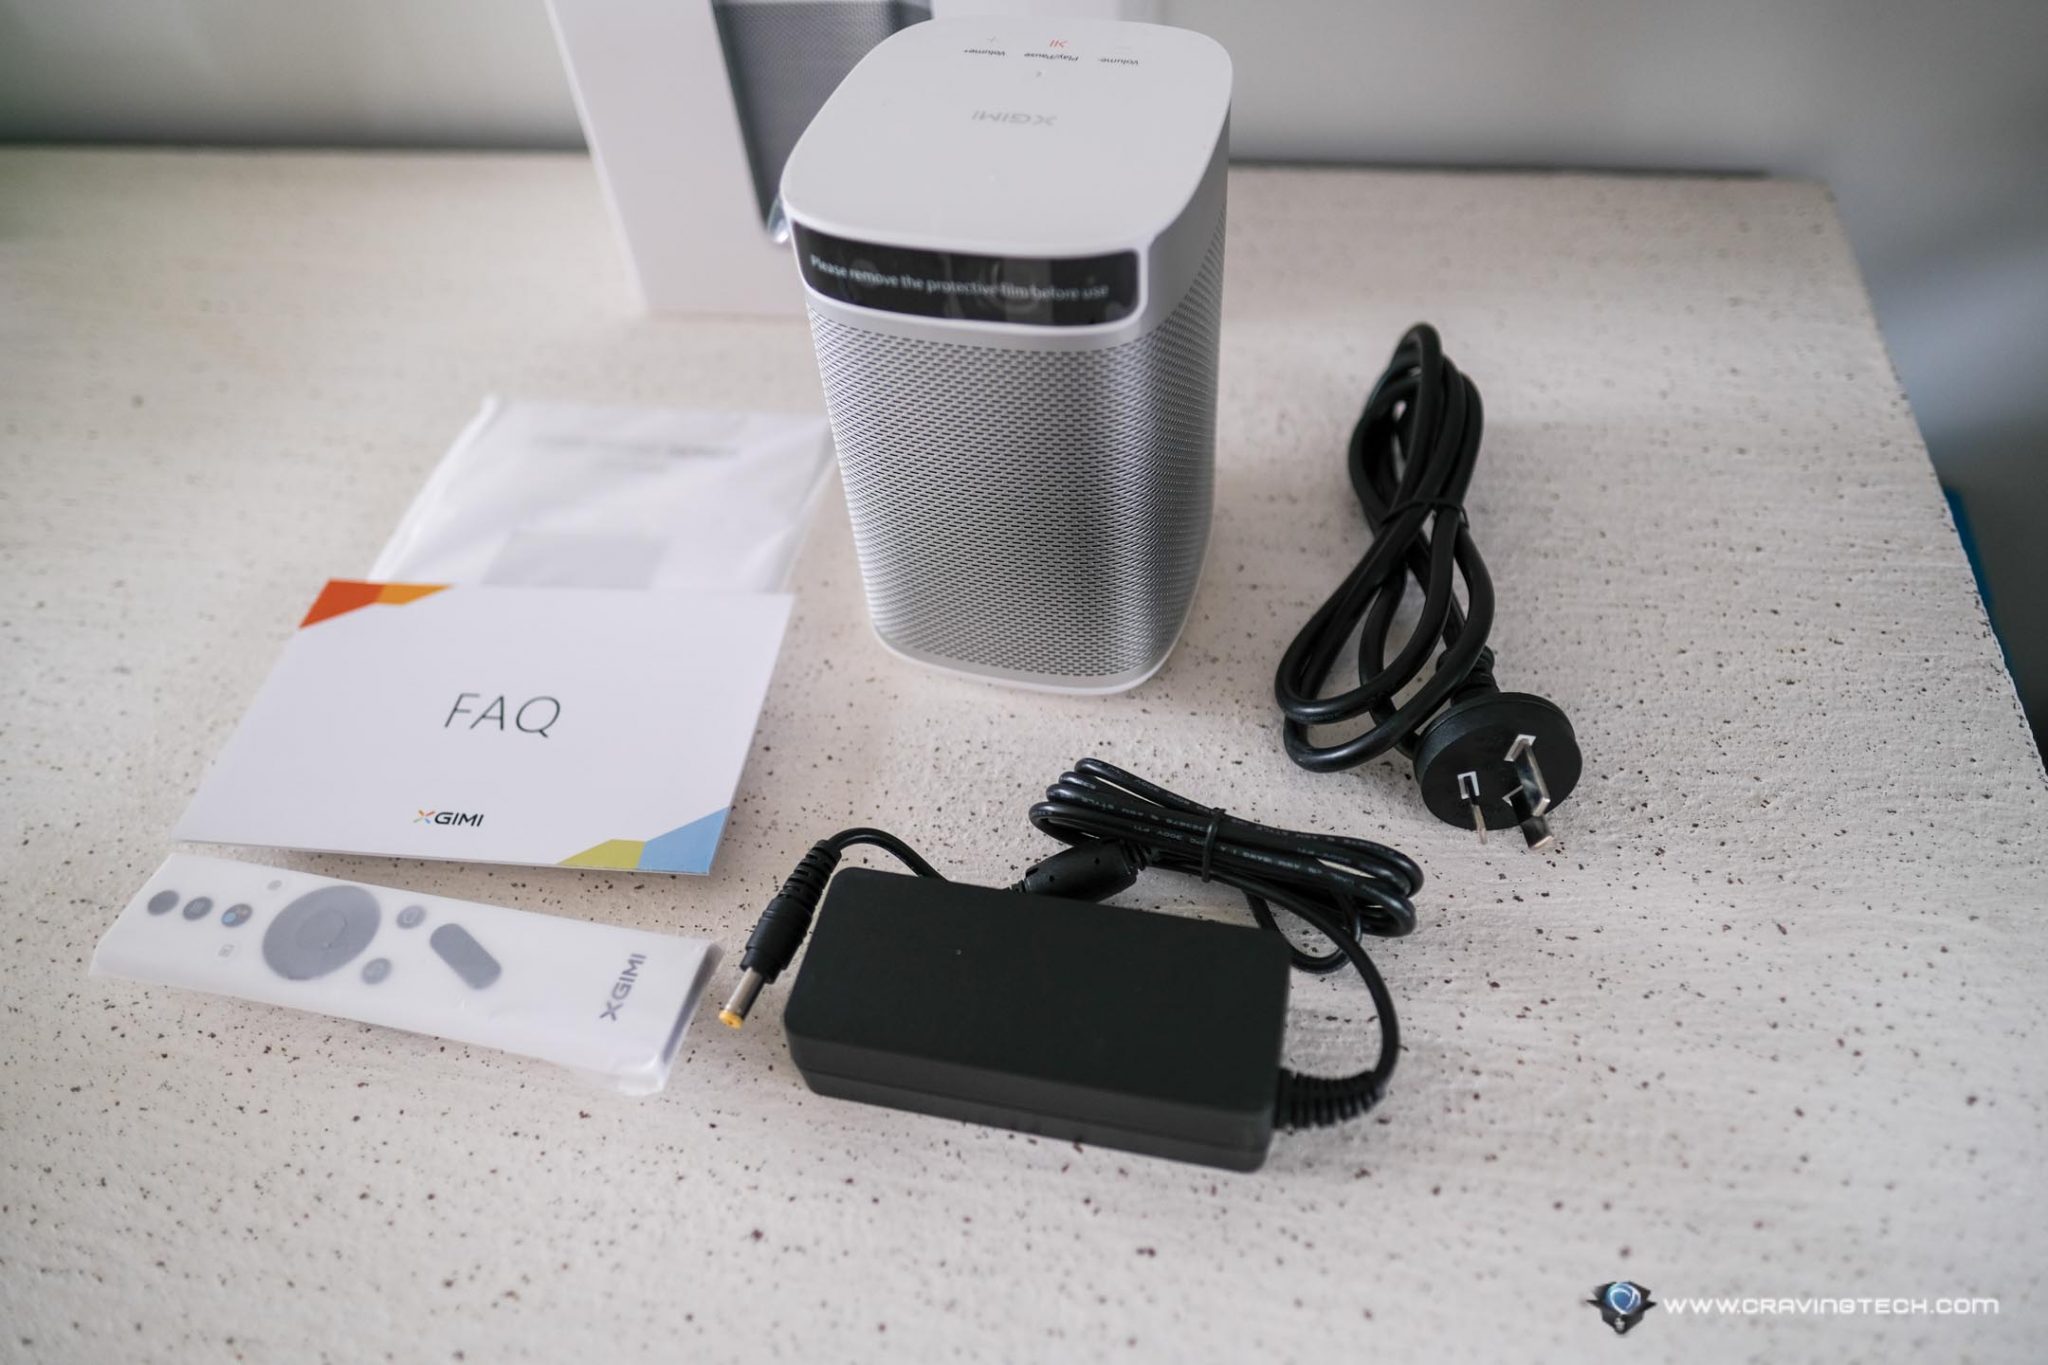 XGIMI MoGo Pro Review - 1080p Portable Projector with Android TV